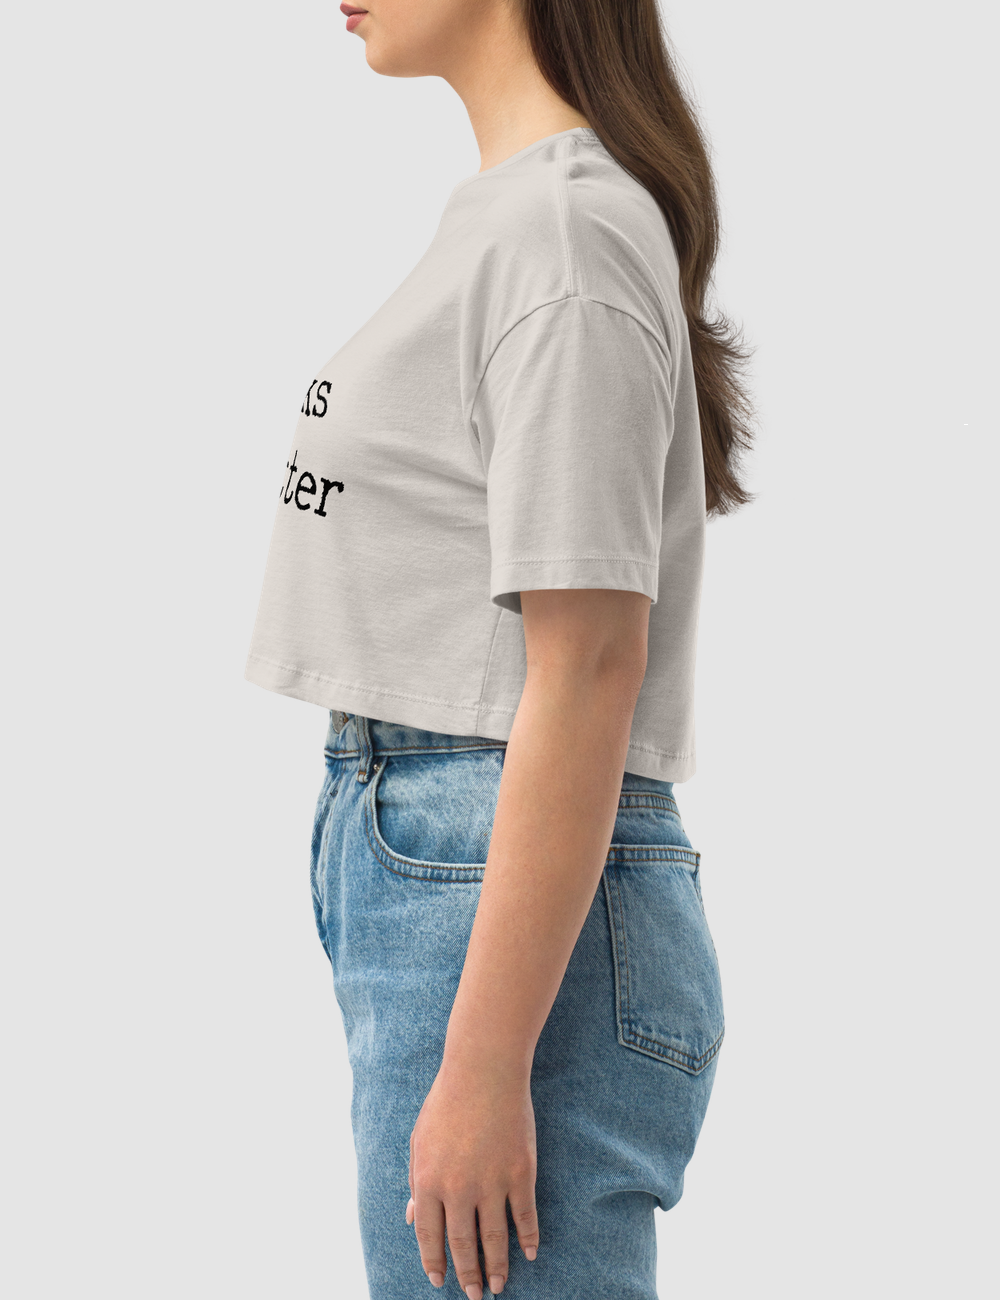 Boys In Books Are Better | Women's Loose Fit Crop Top T-Shirt OniTakai